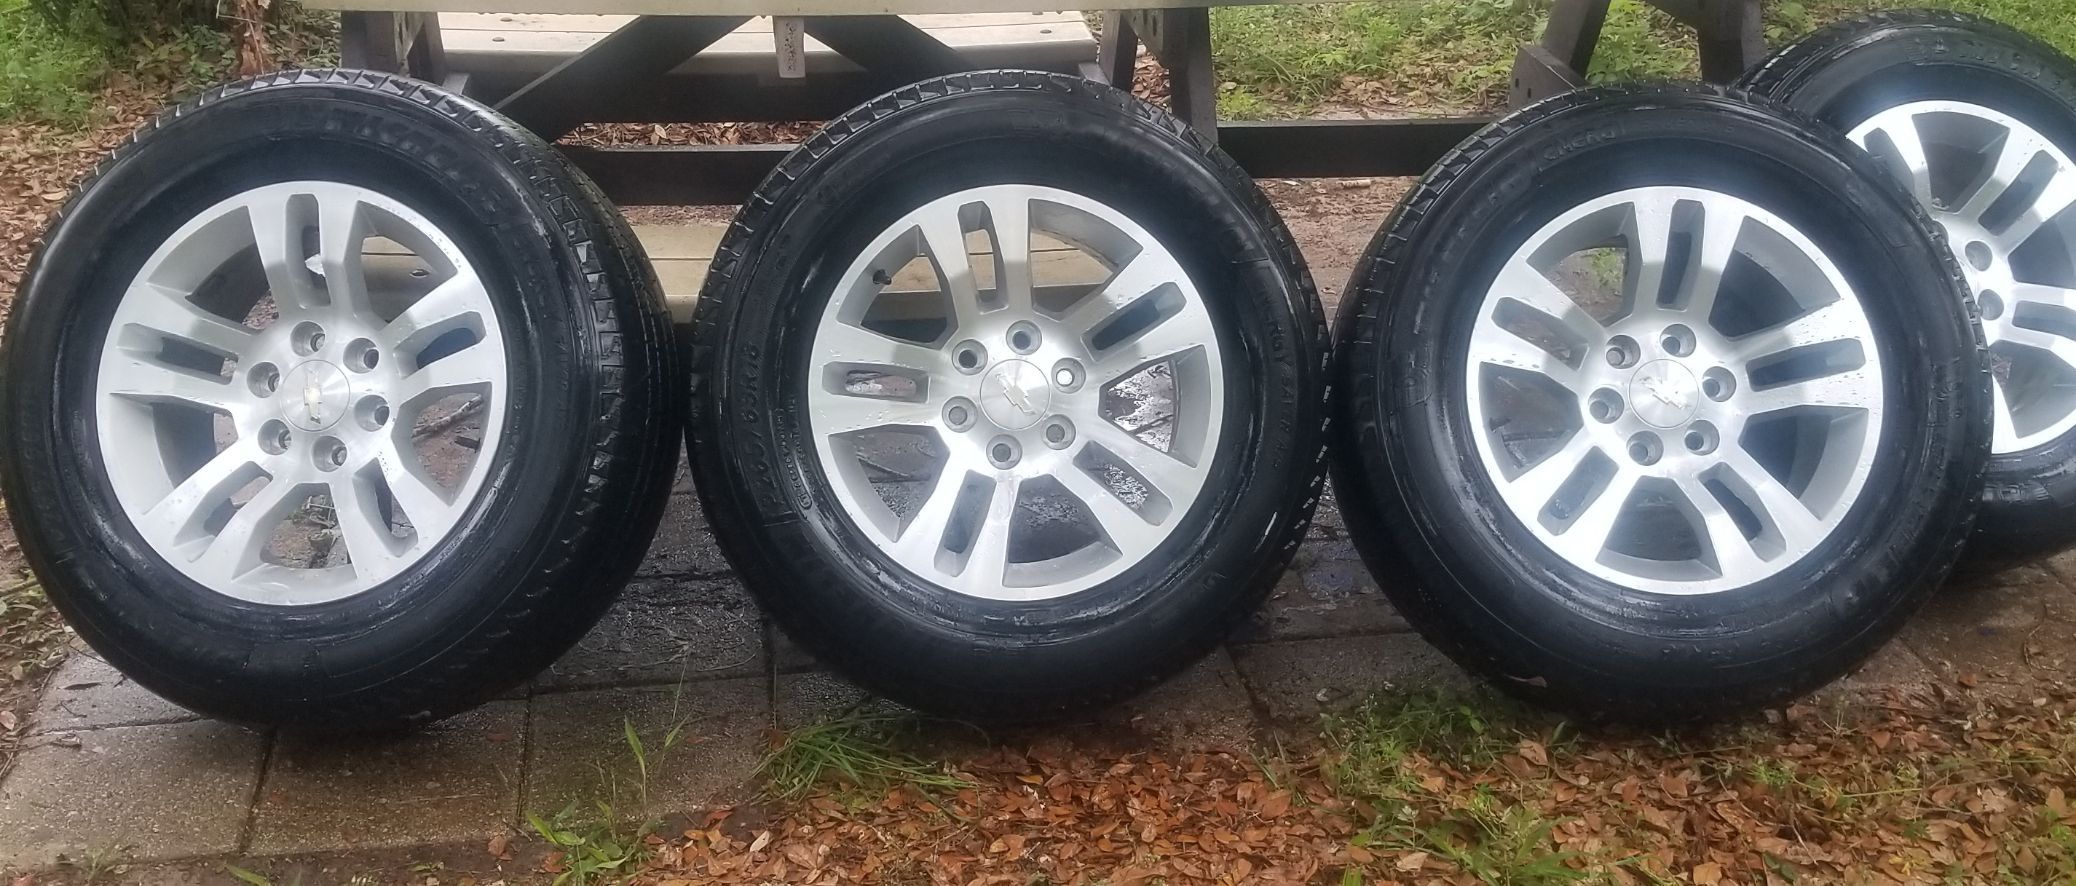 Chevy Rims And Tires